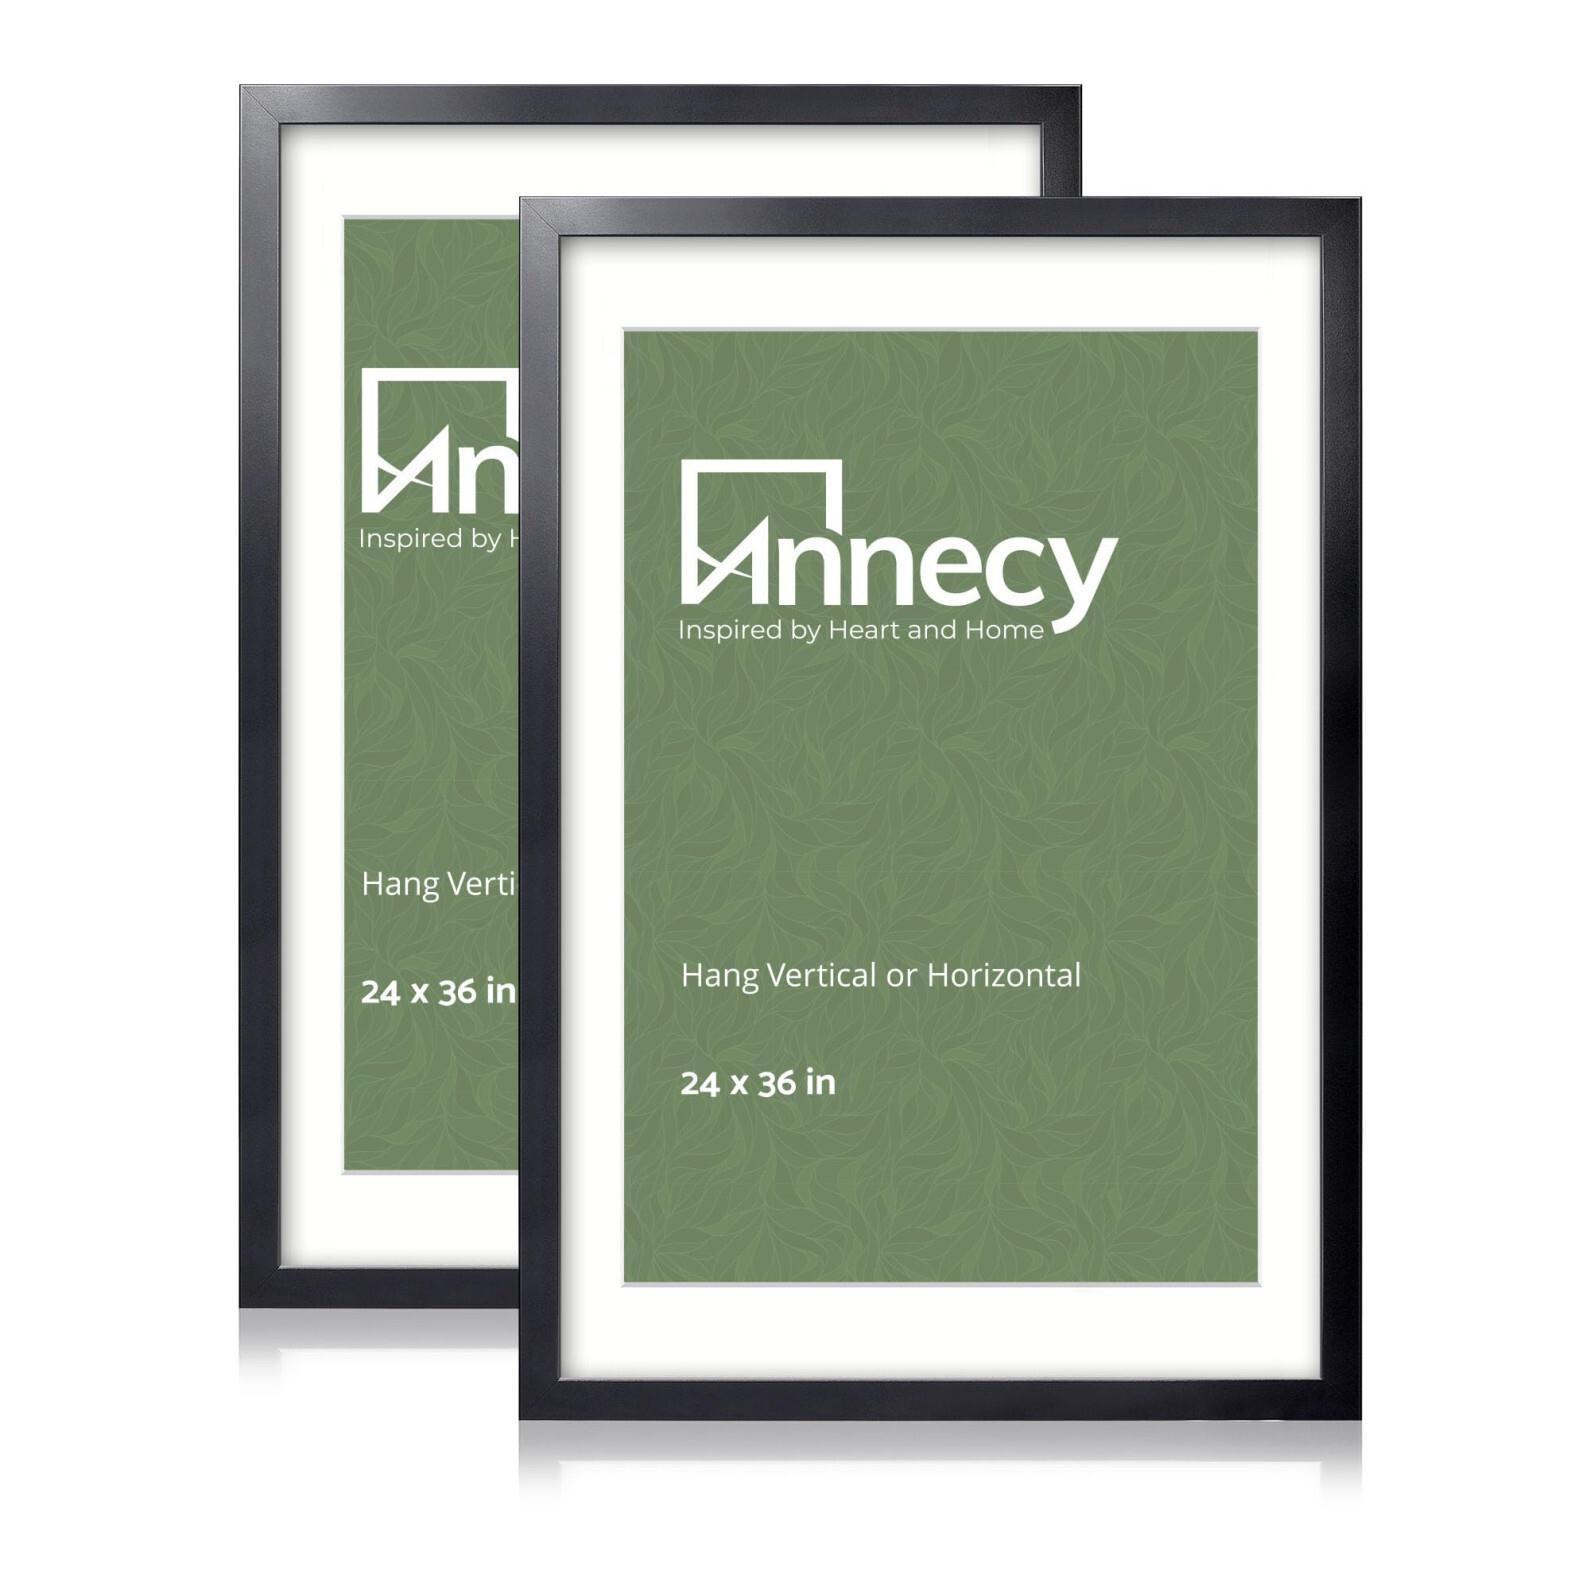 Annecy 24x36 Picture Frame Black(1 Pack), 24 x 36